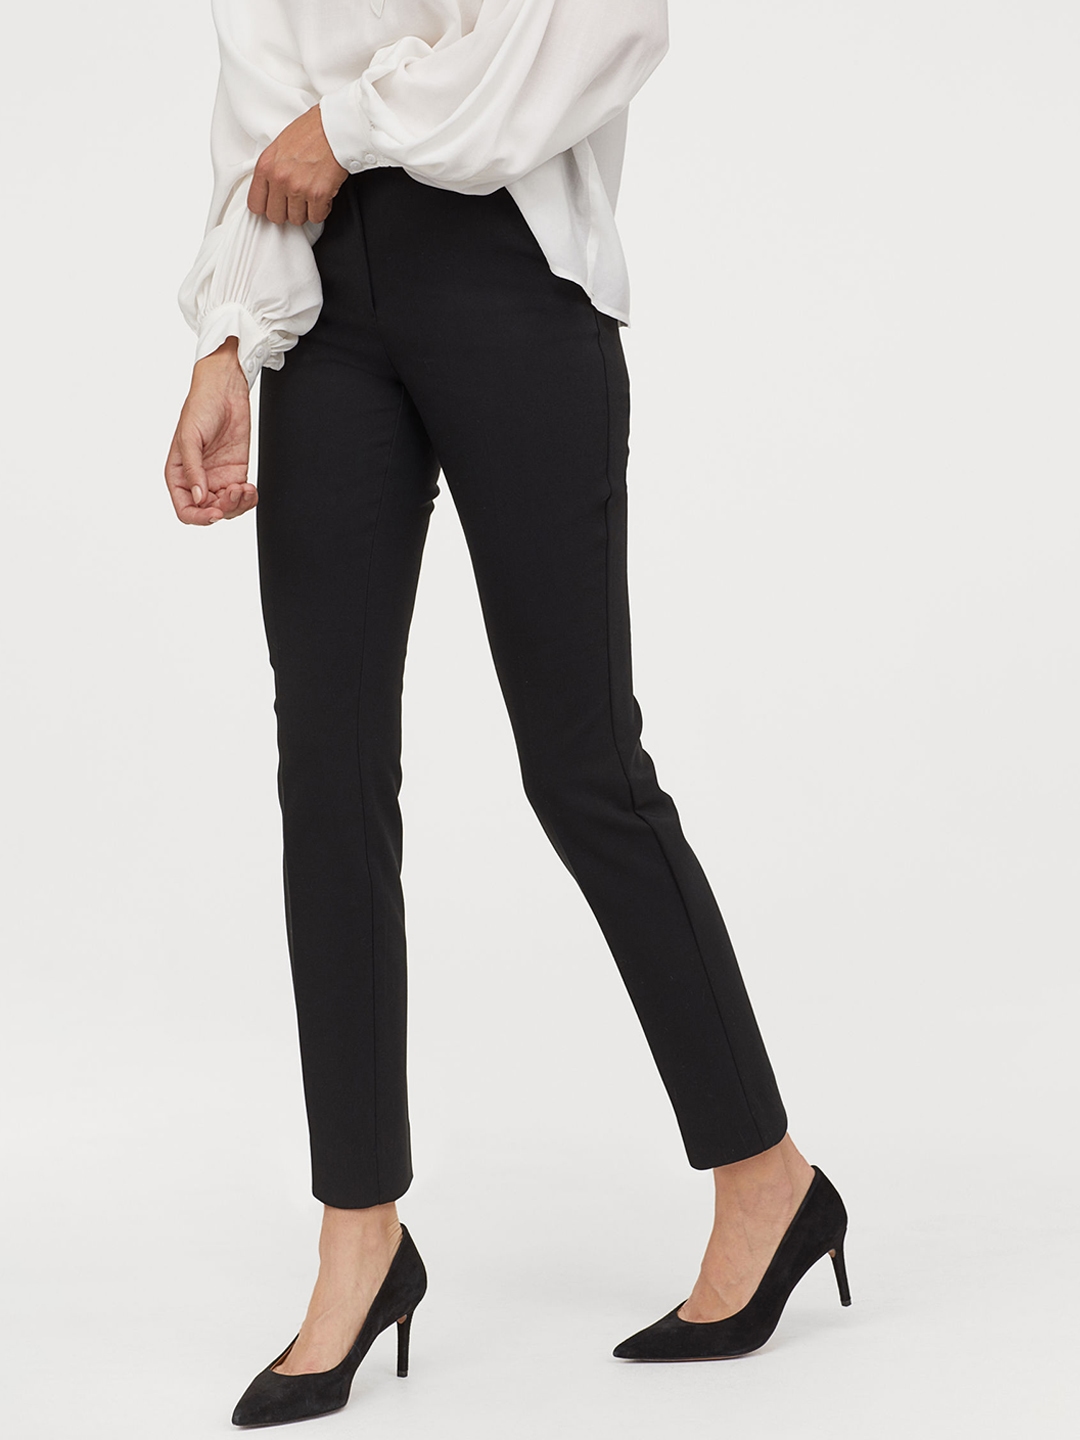 Discover more than 82 black formal trousers womens - in.duhocakina